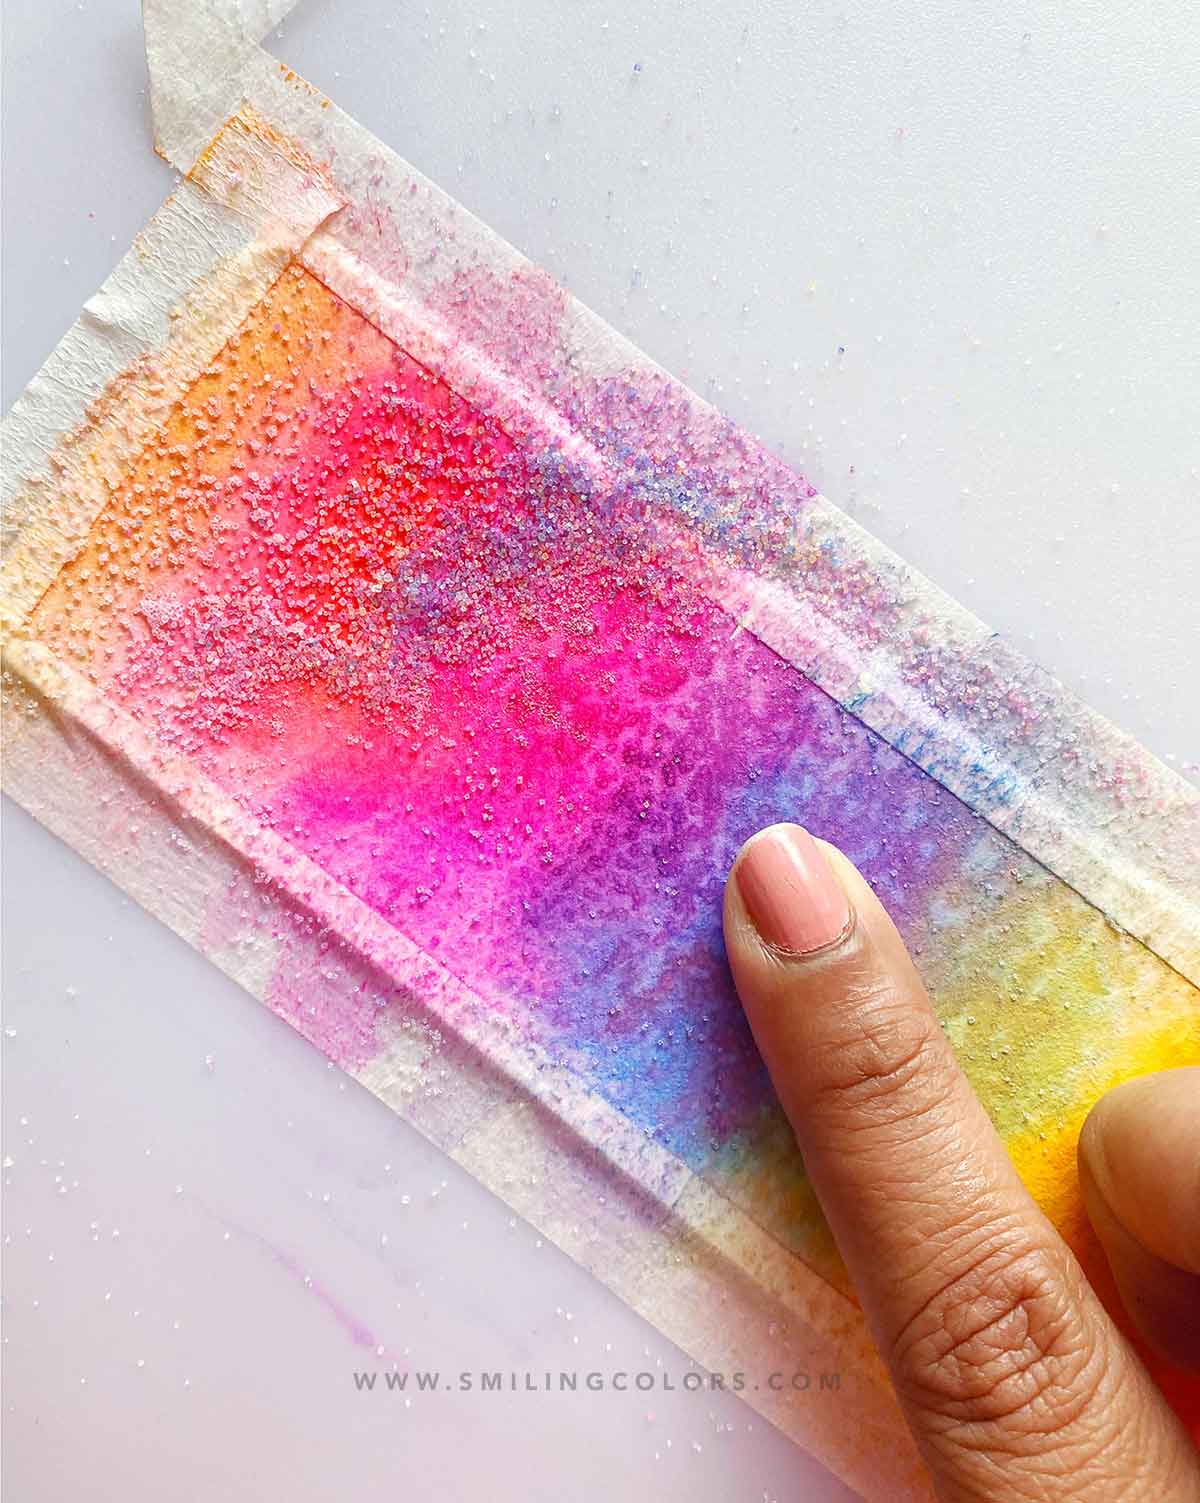 How to Keep Watercolor Paper from Warping: 10 Steps